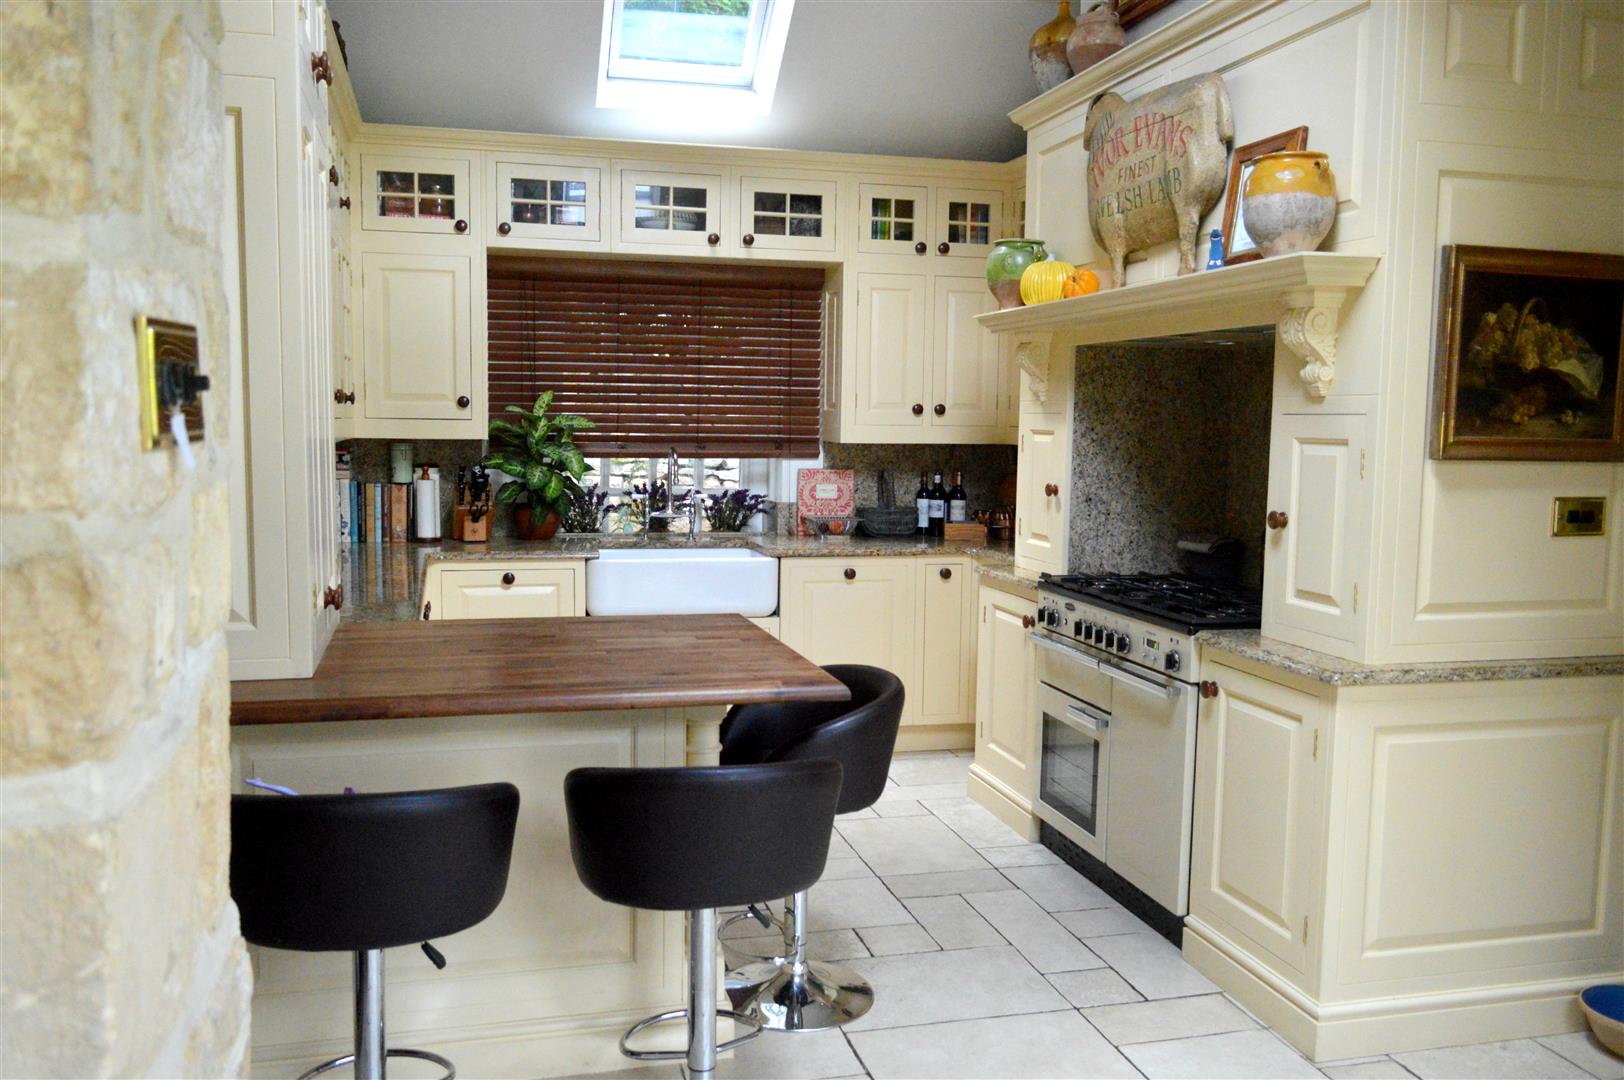 Redbrook kitchens design and install bespoke kitchens in Gloucestershire